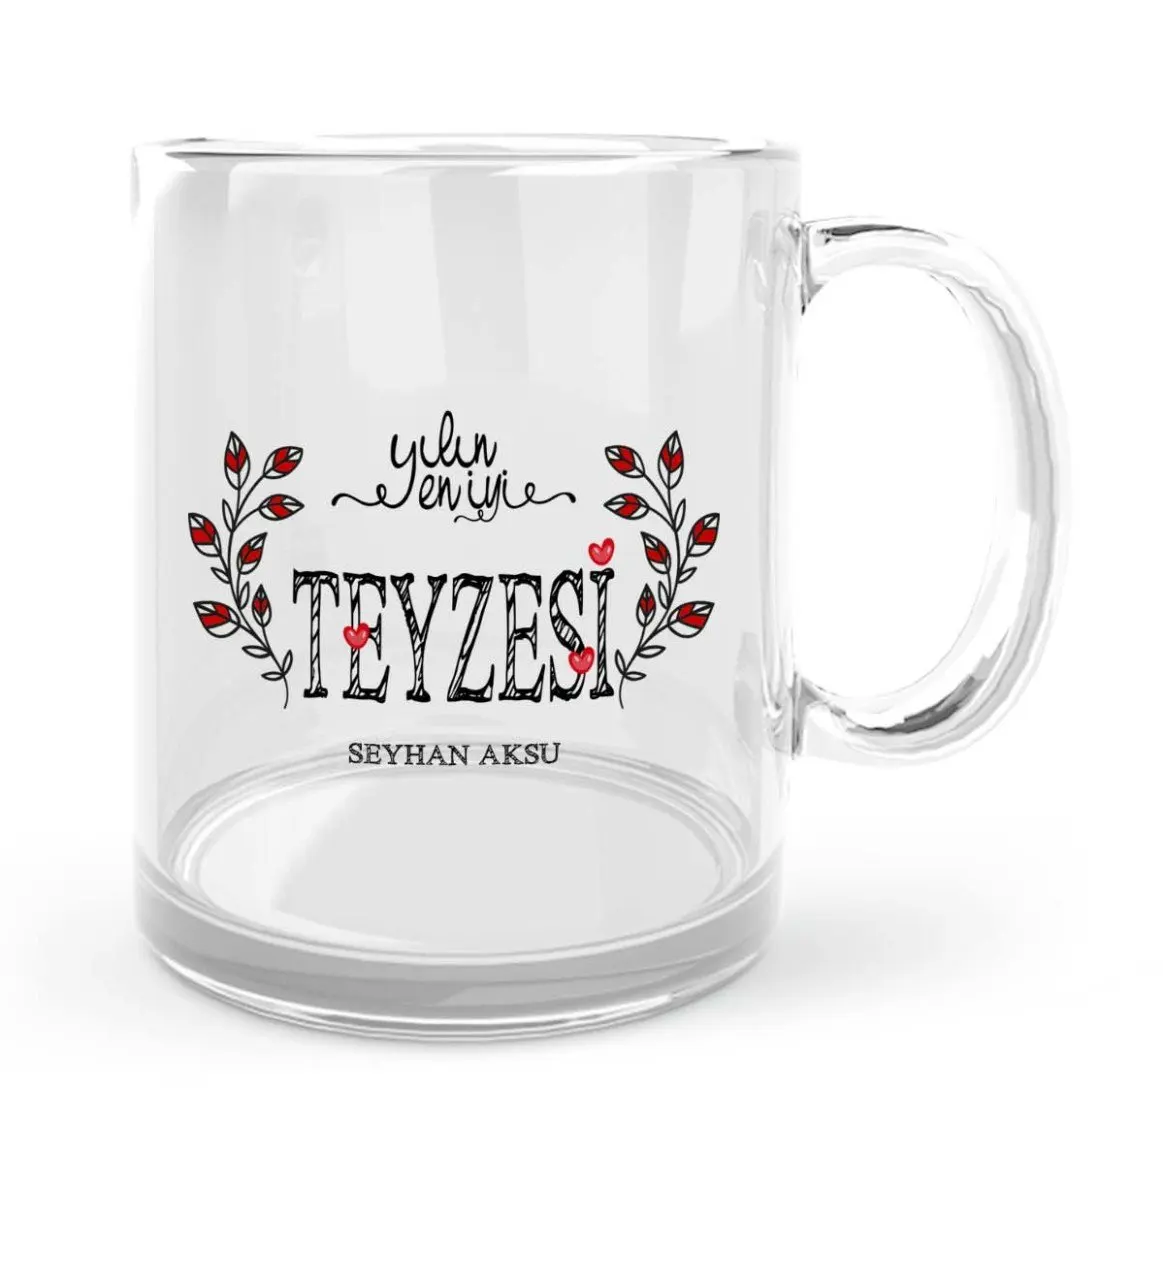 

Personalized The Year 'S Best Teyzesi Glass Mug Cup